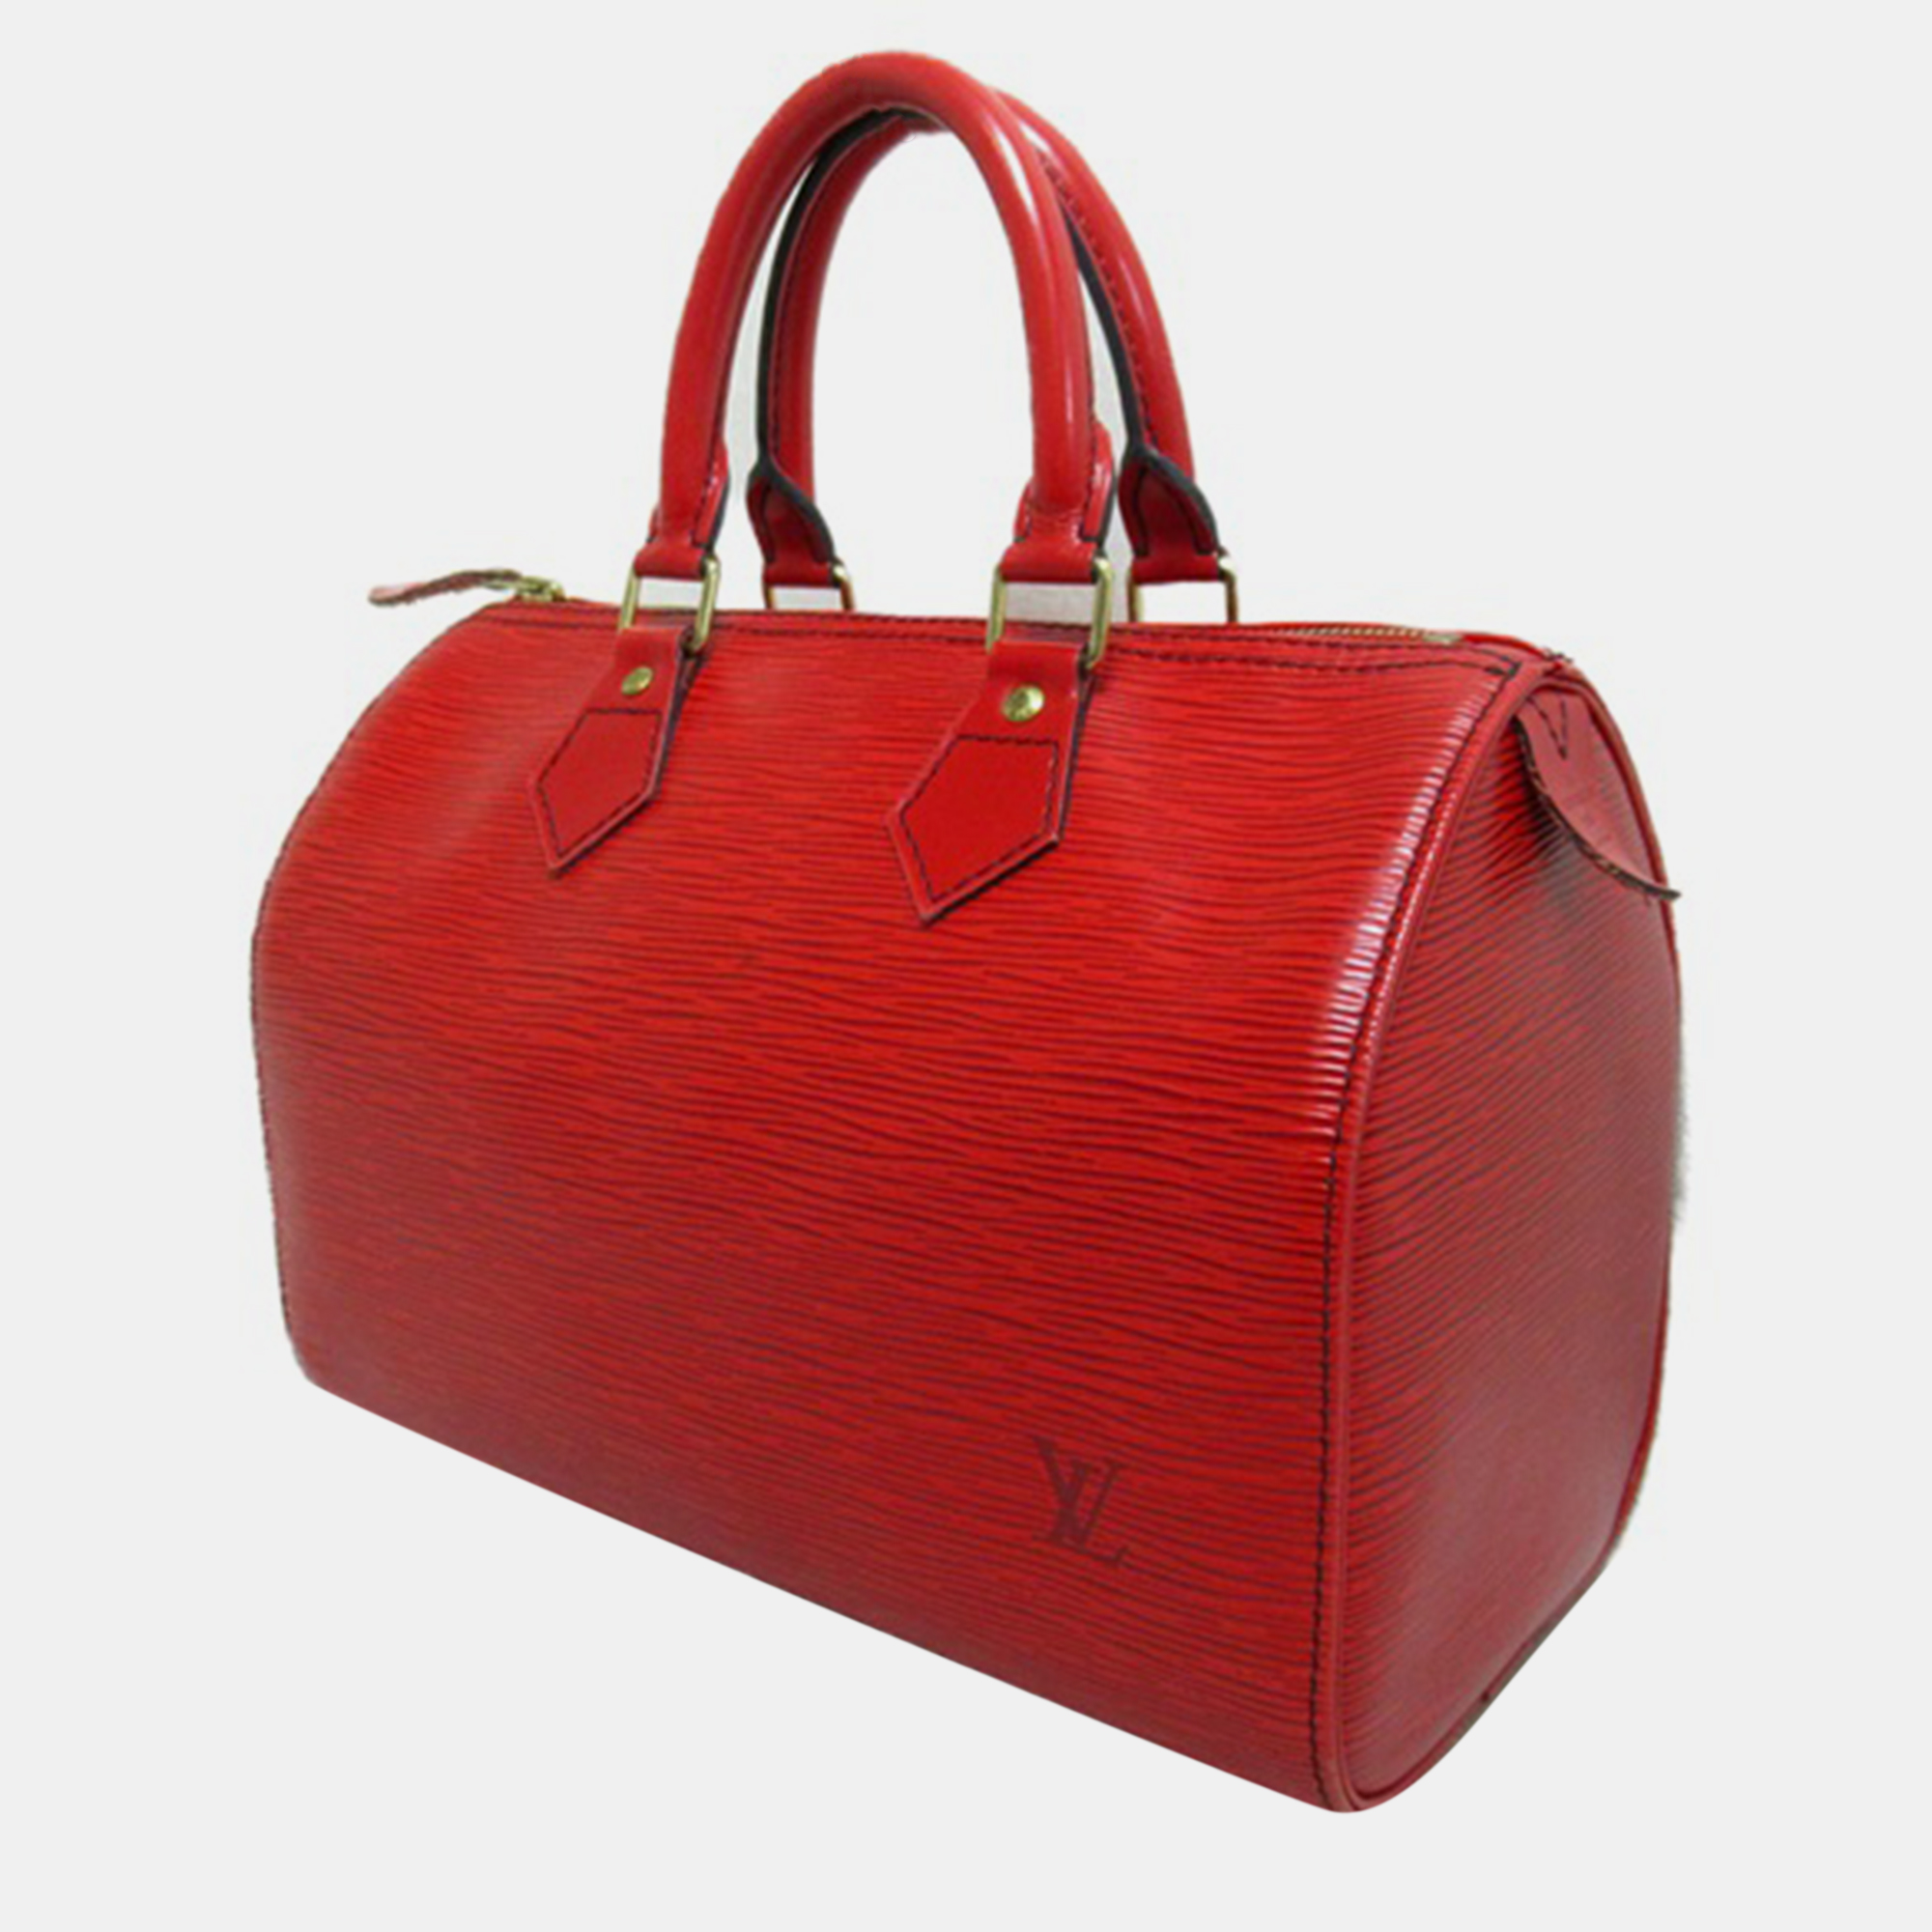 

Louis Vuitton Red Epi Leather Speedy 30 Top Handle Bag